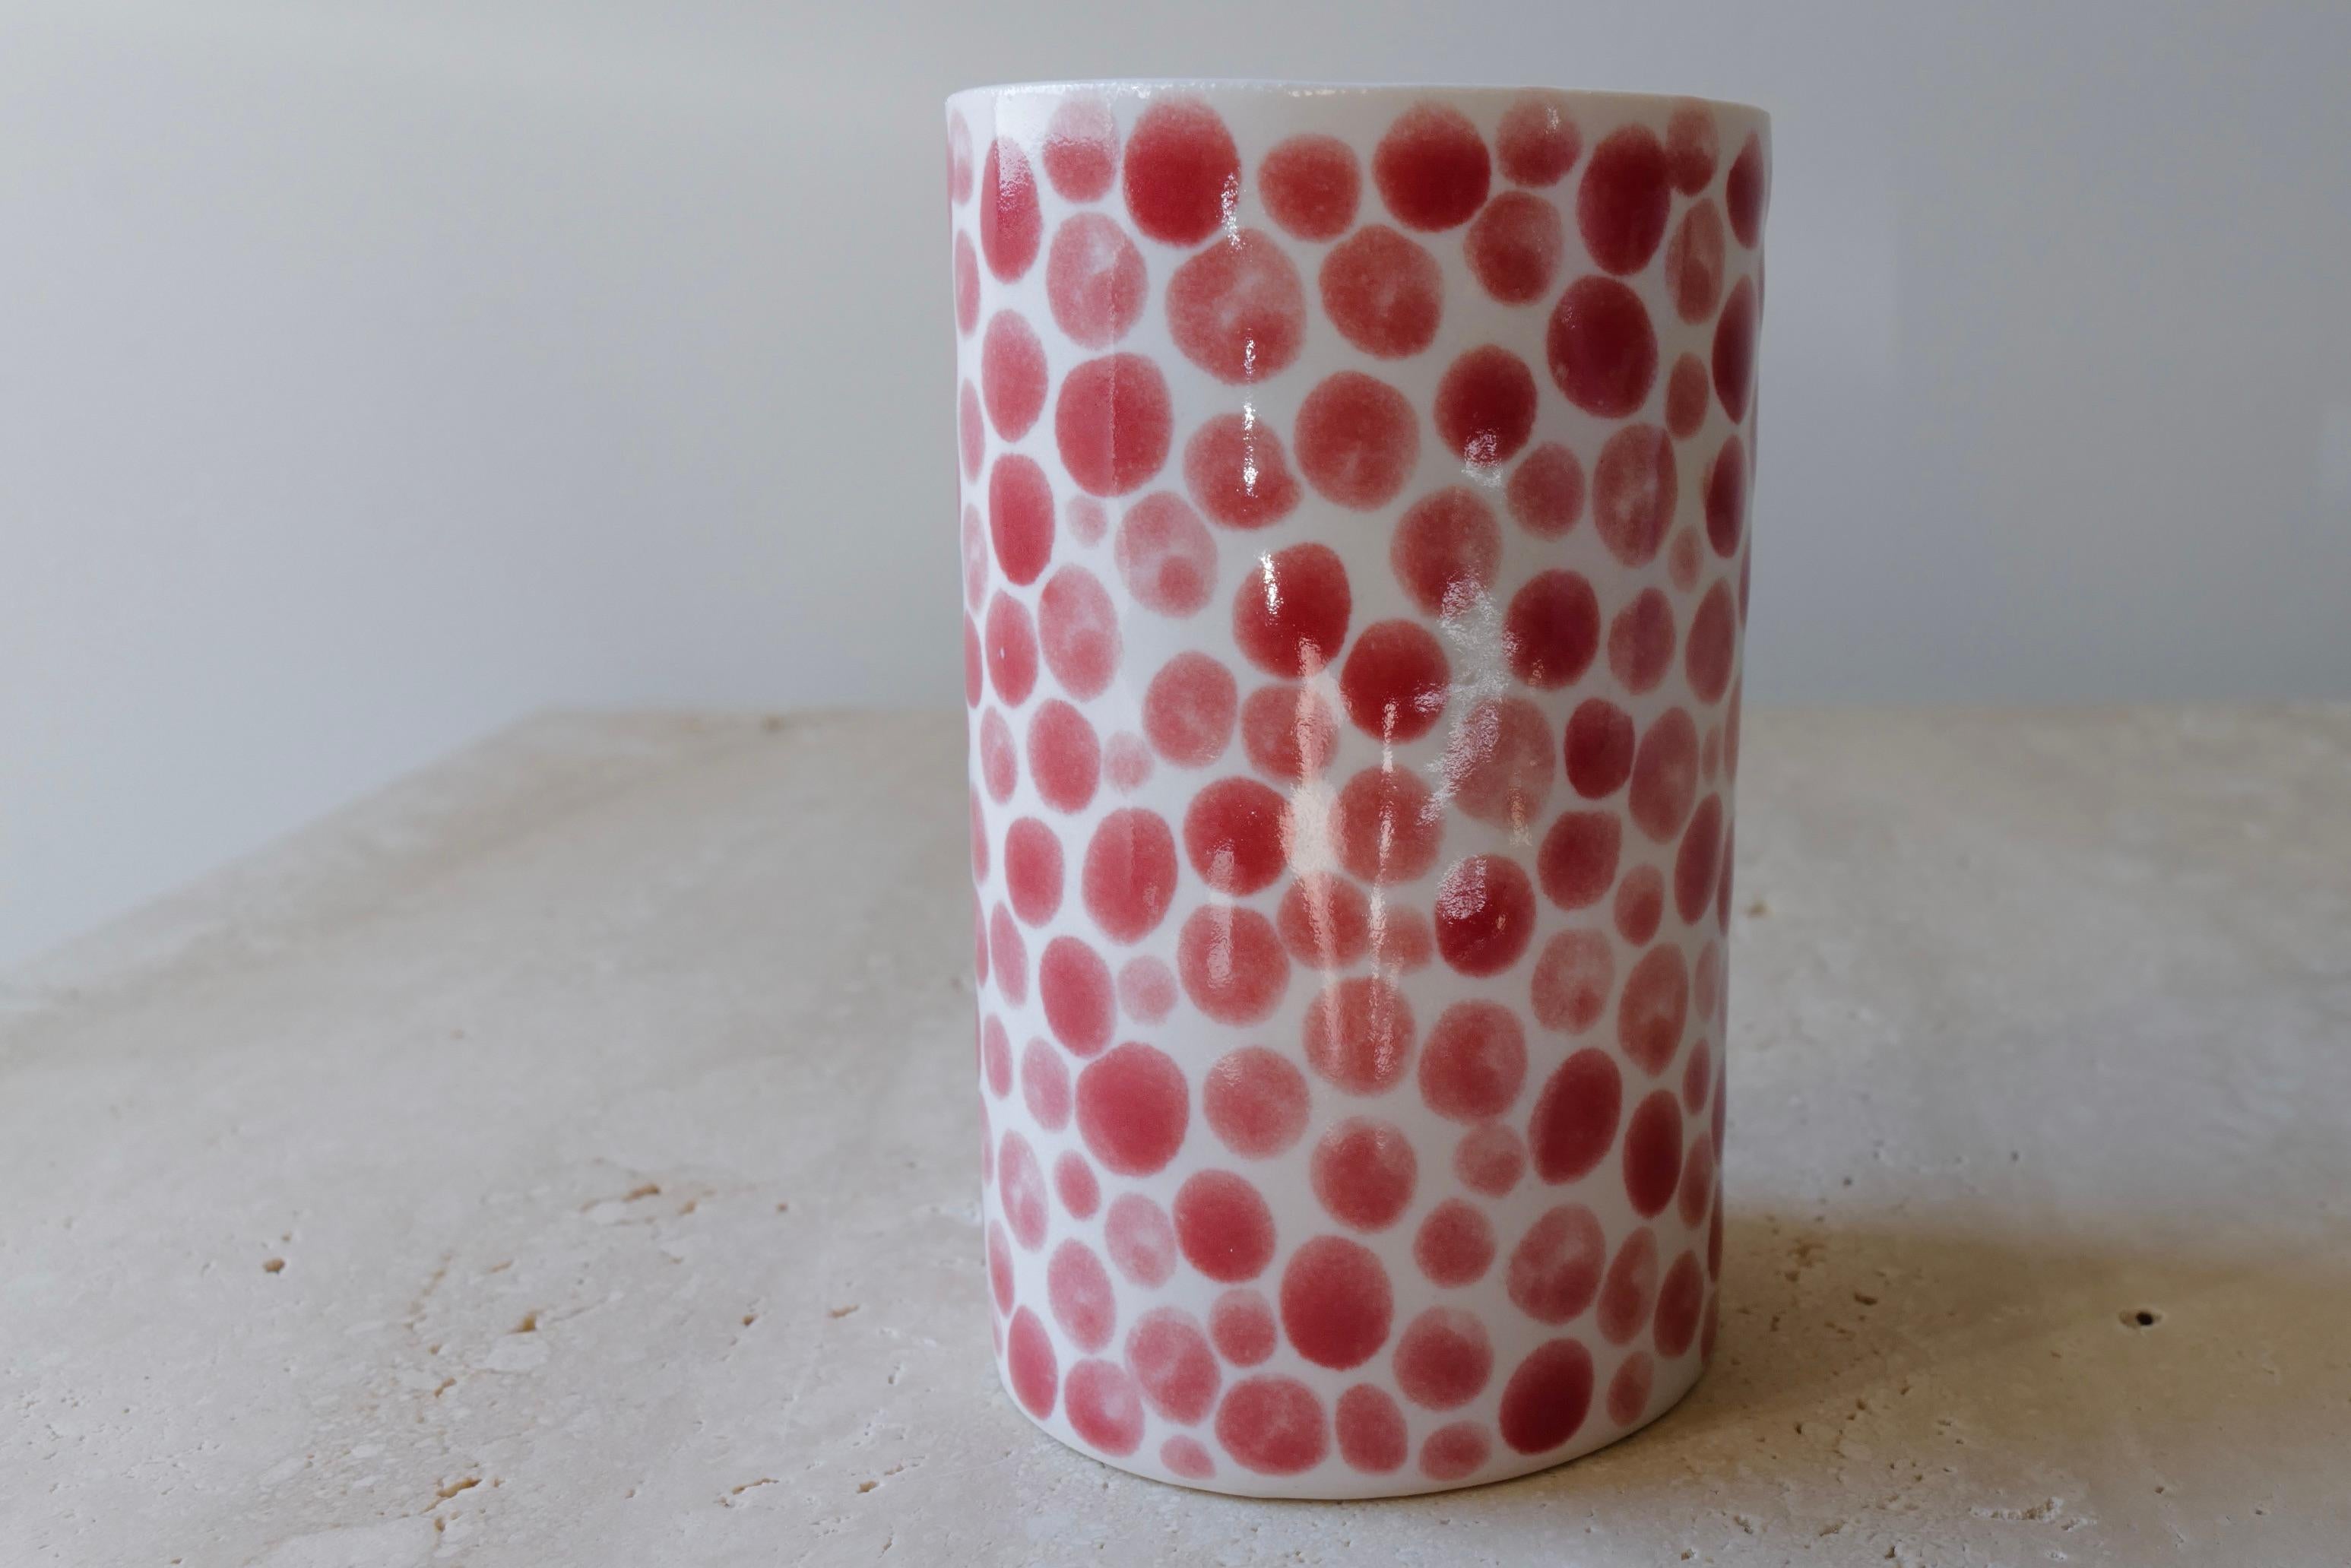 Cast Red Dots Porcelain Tall Cup by Lana Kova